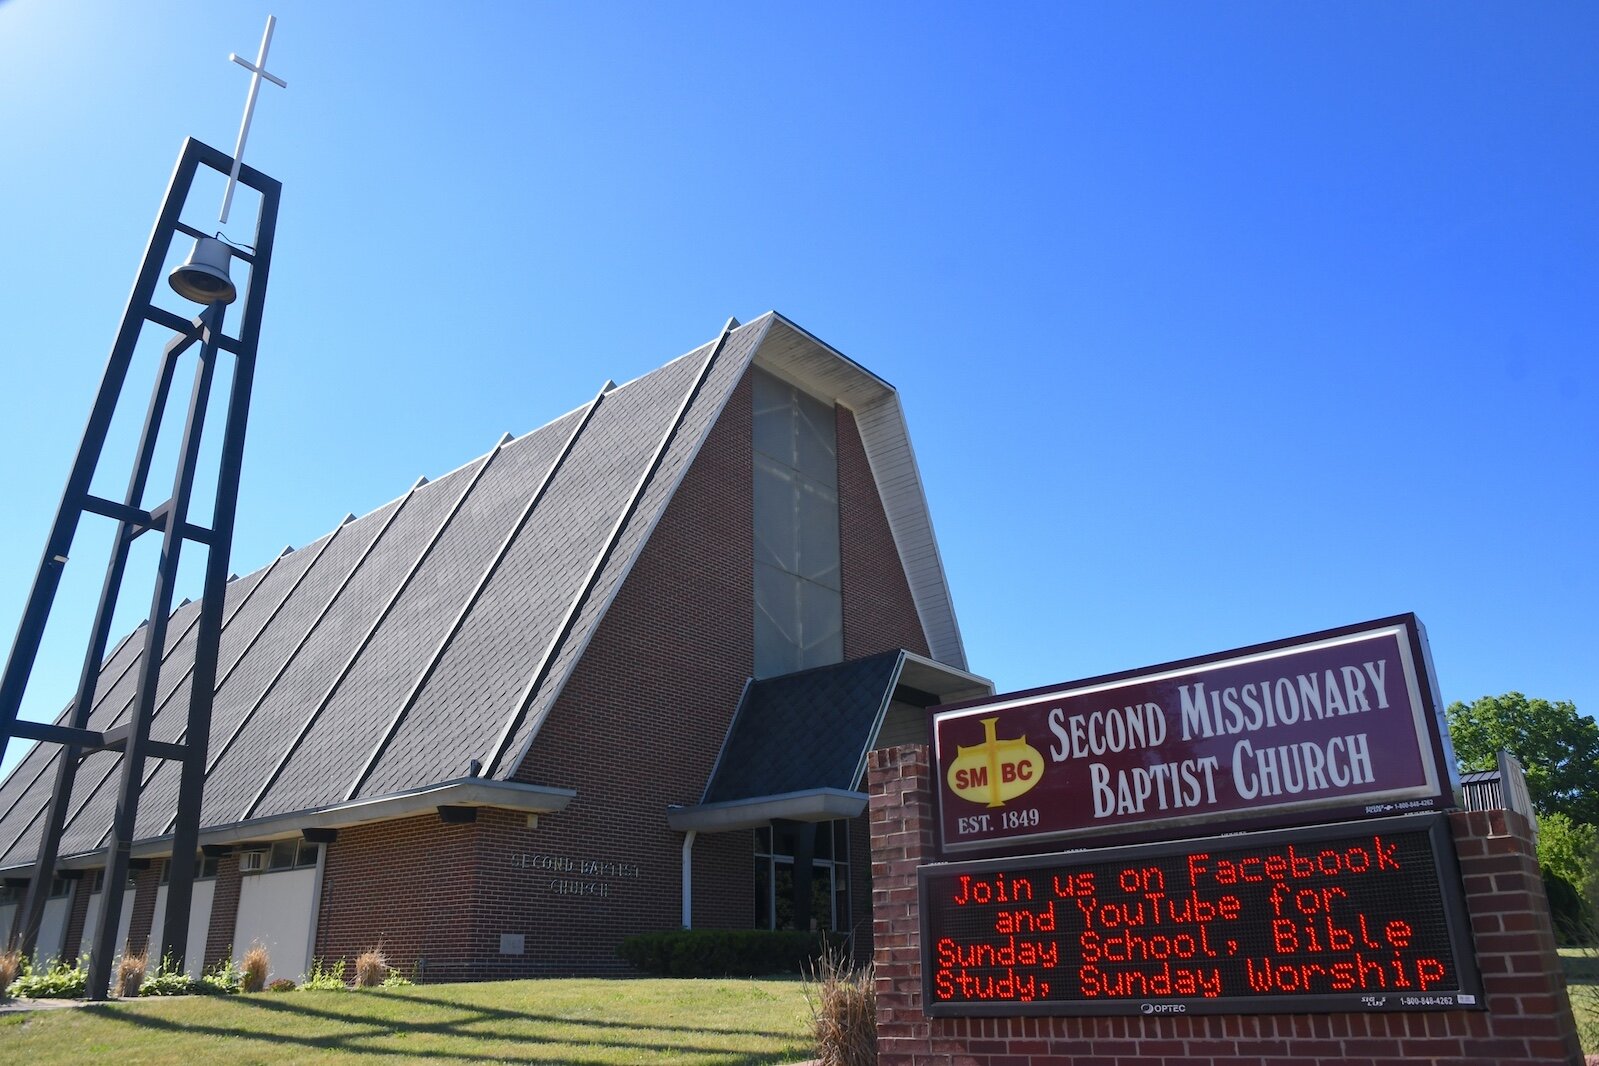 Second Missionary Baptist Church is located on North Washington Avenue.